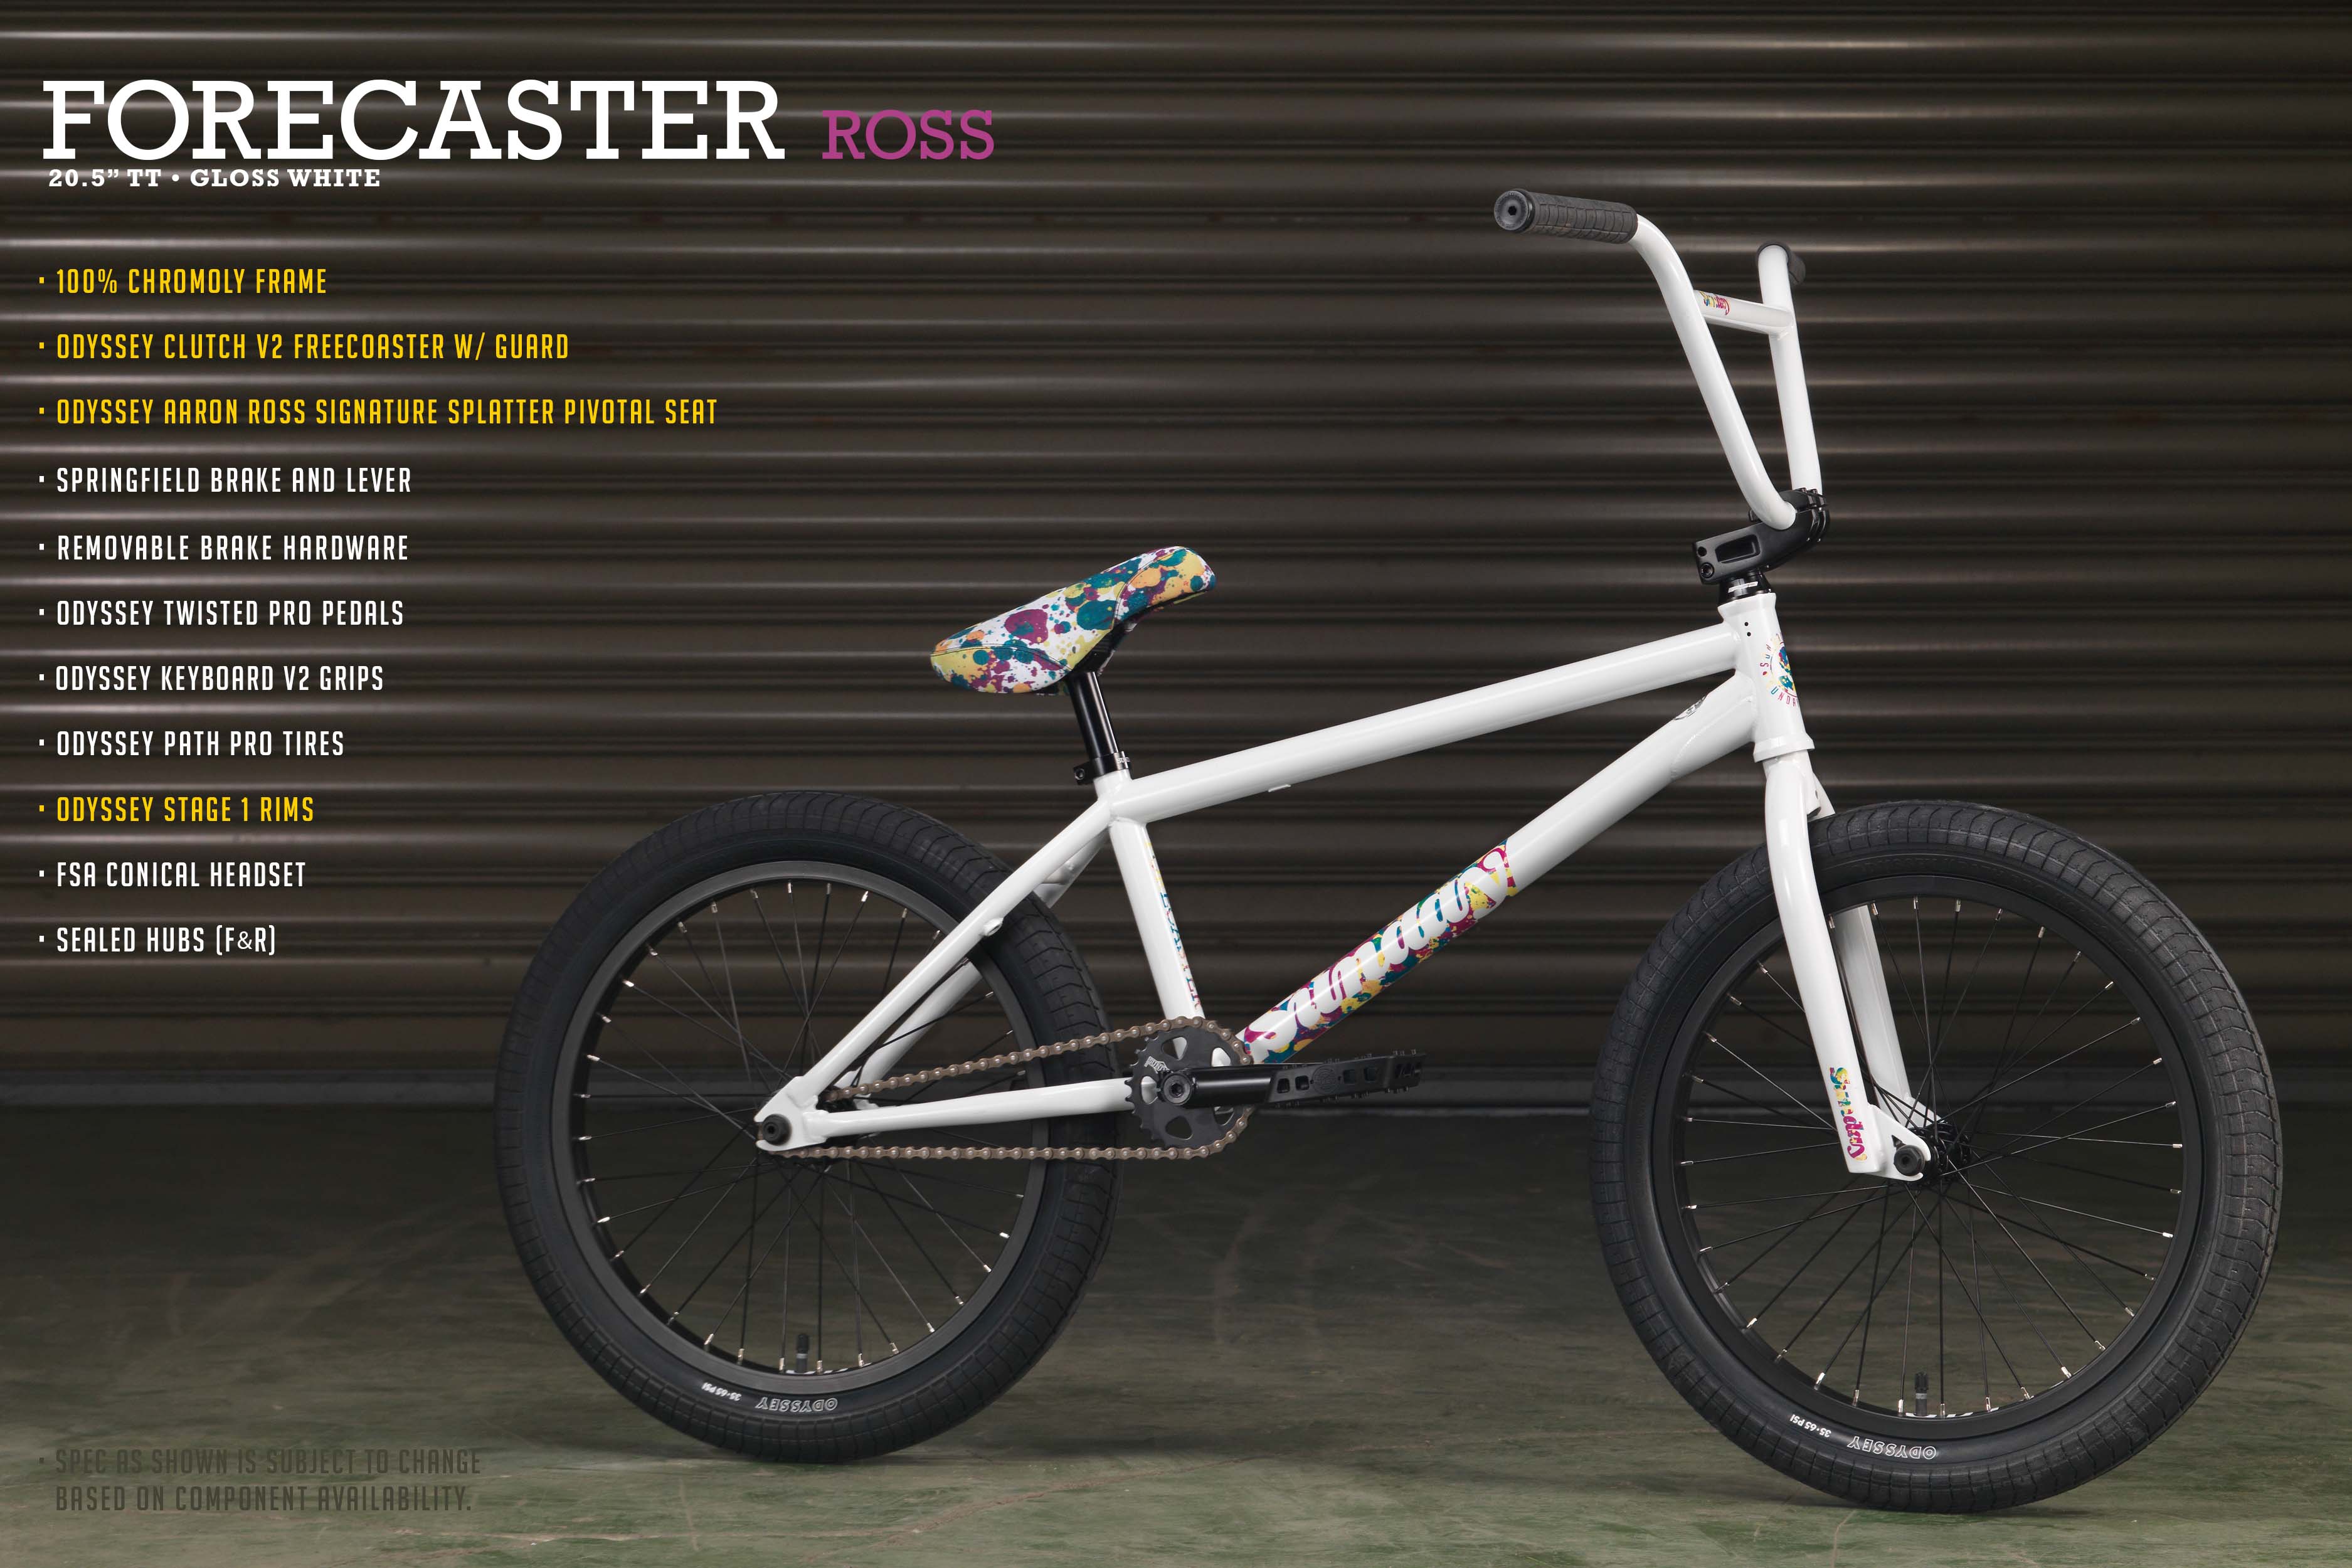 Sunday Forecaster - Aaron Ross Signature (Gloss White with 20.5